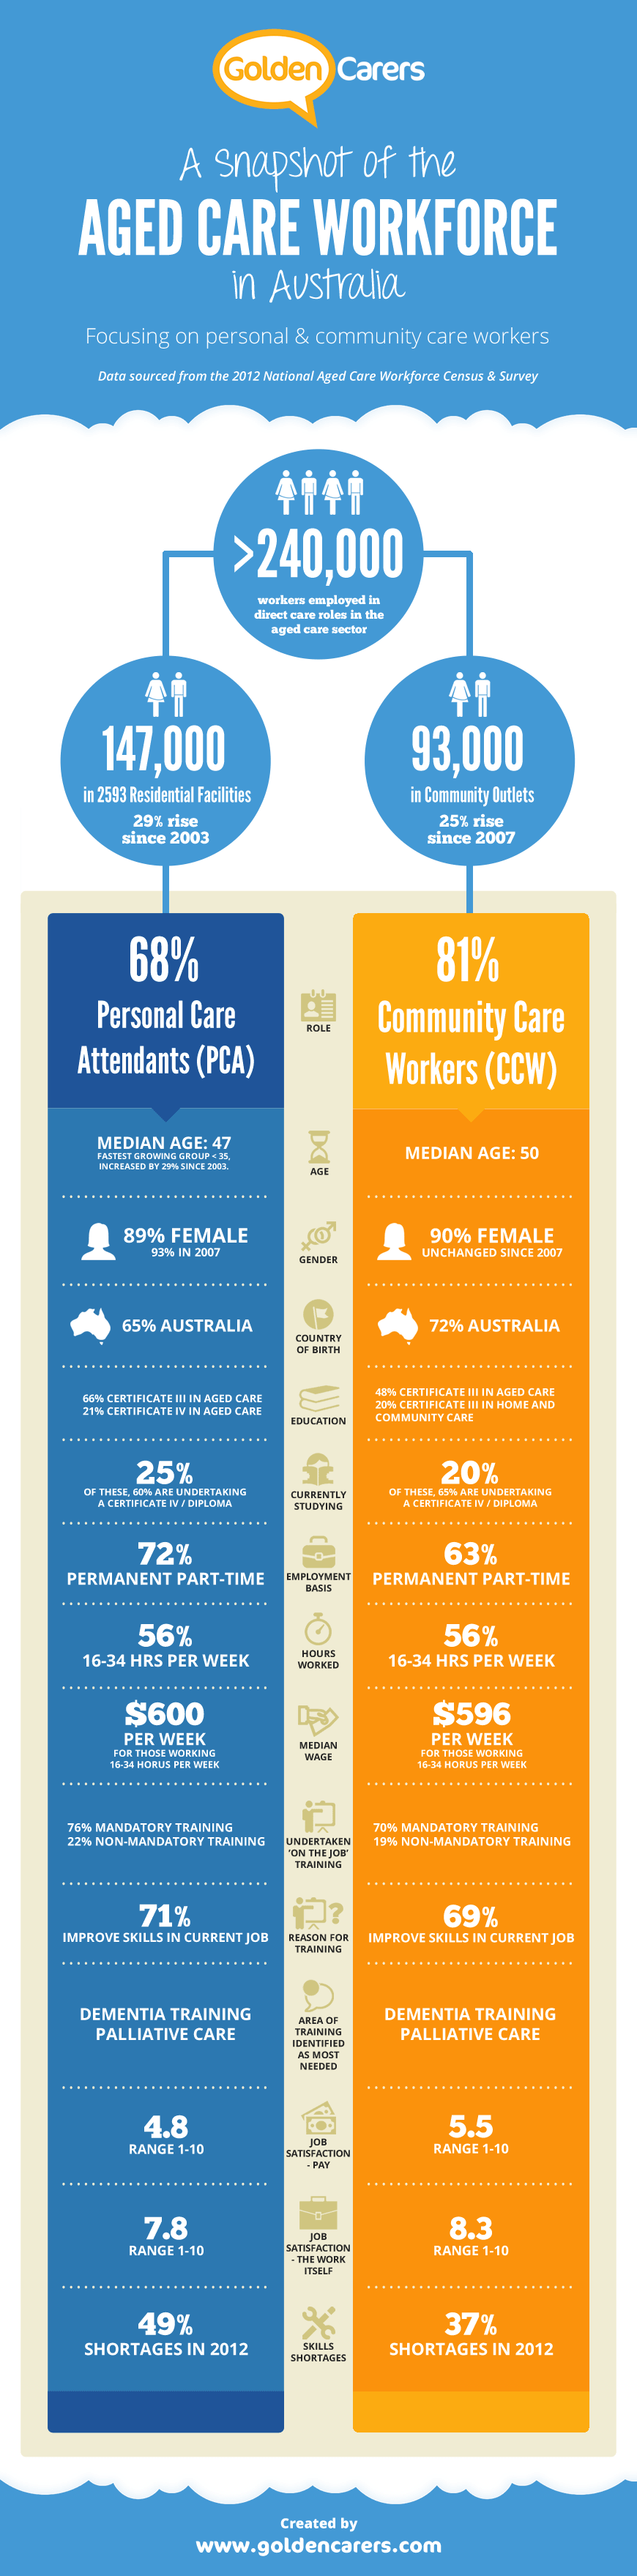 Aged Care Workforce